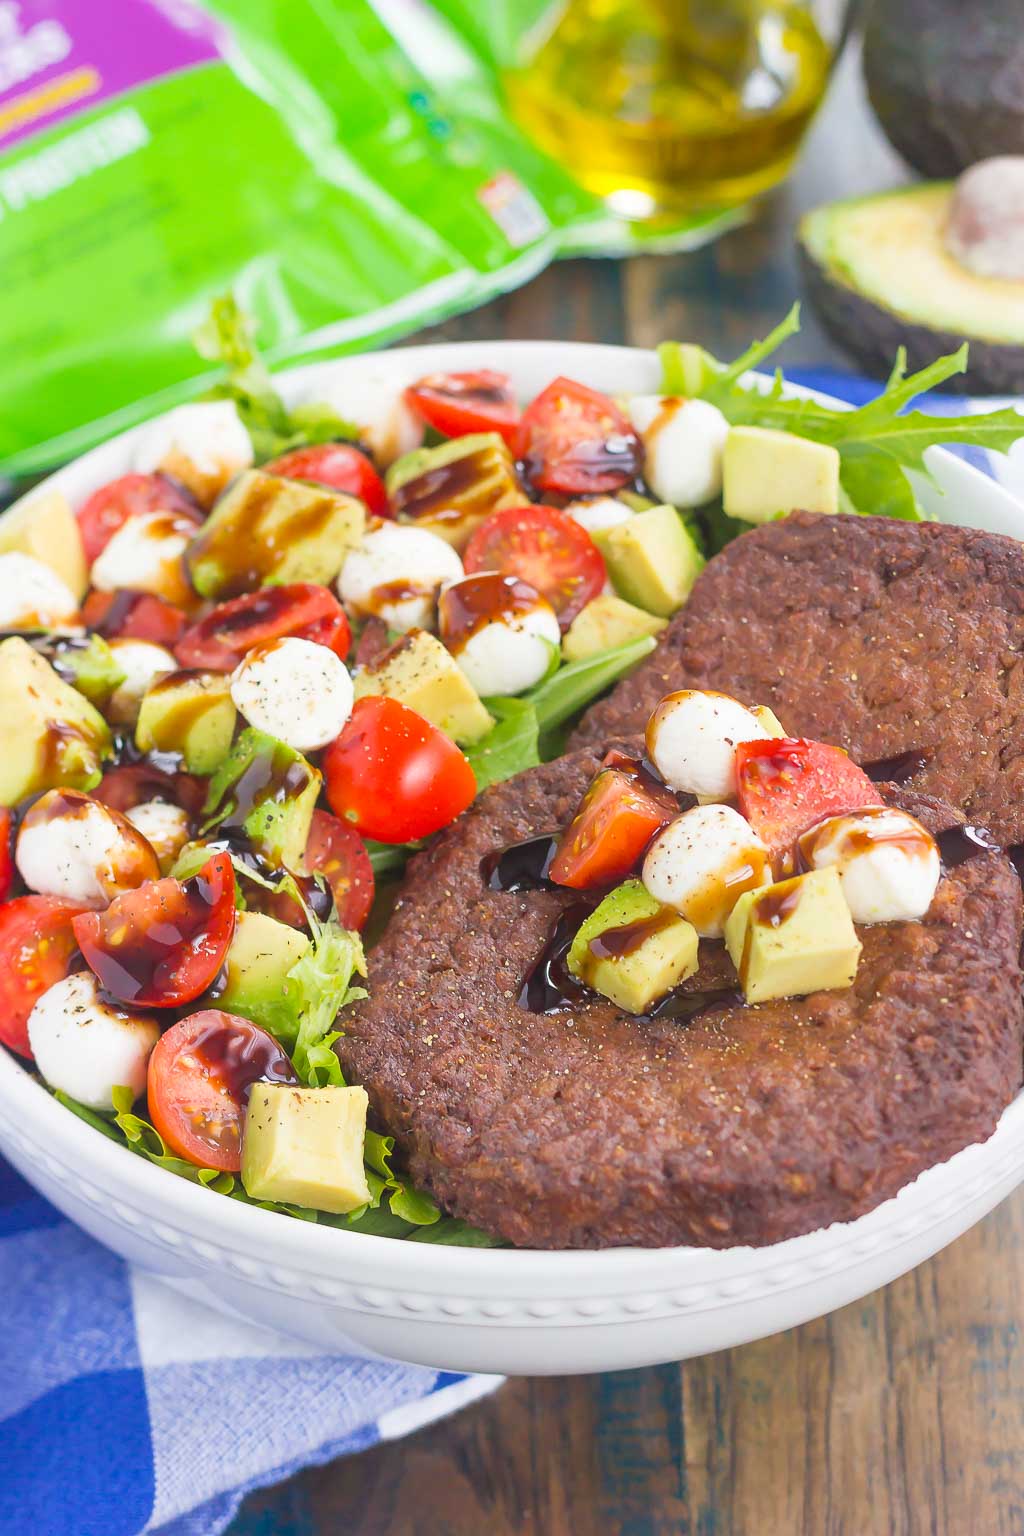 This Avocado Caprese Burger Salad is a healthier way to switch up your meal routine. It's packed with diced avocado, cherry tomatoes, mozzarella pearls, veggie burgers and drizzled with a sweet balsamic glaze. Simple to make and perfect for just about any time, you'll love the delicious taste of this flavorful salad!